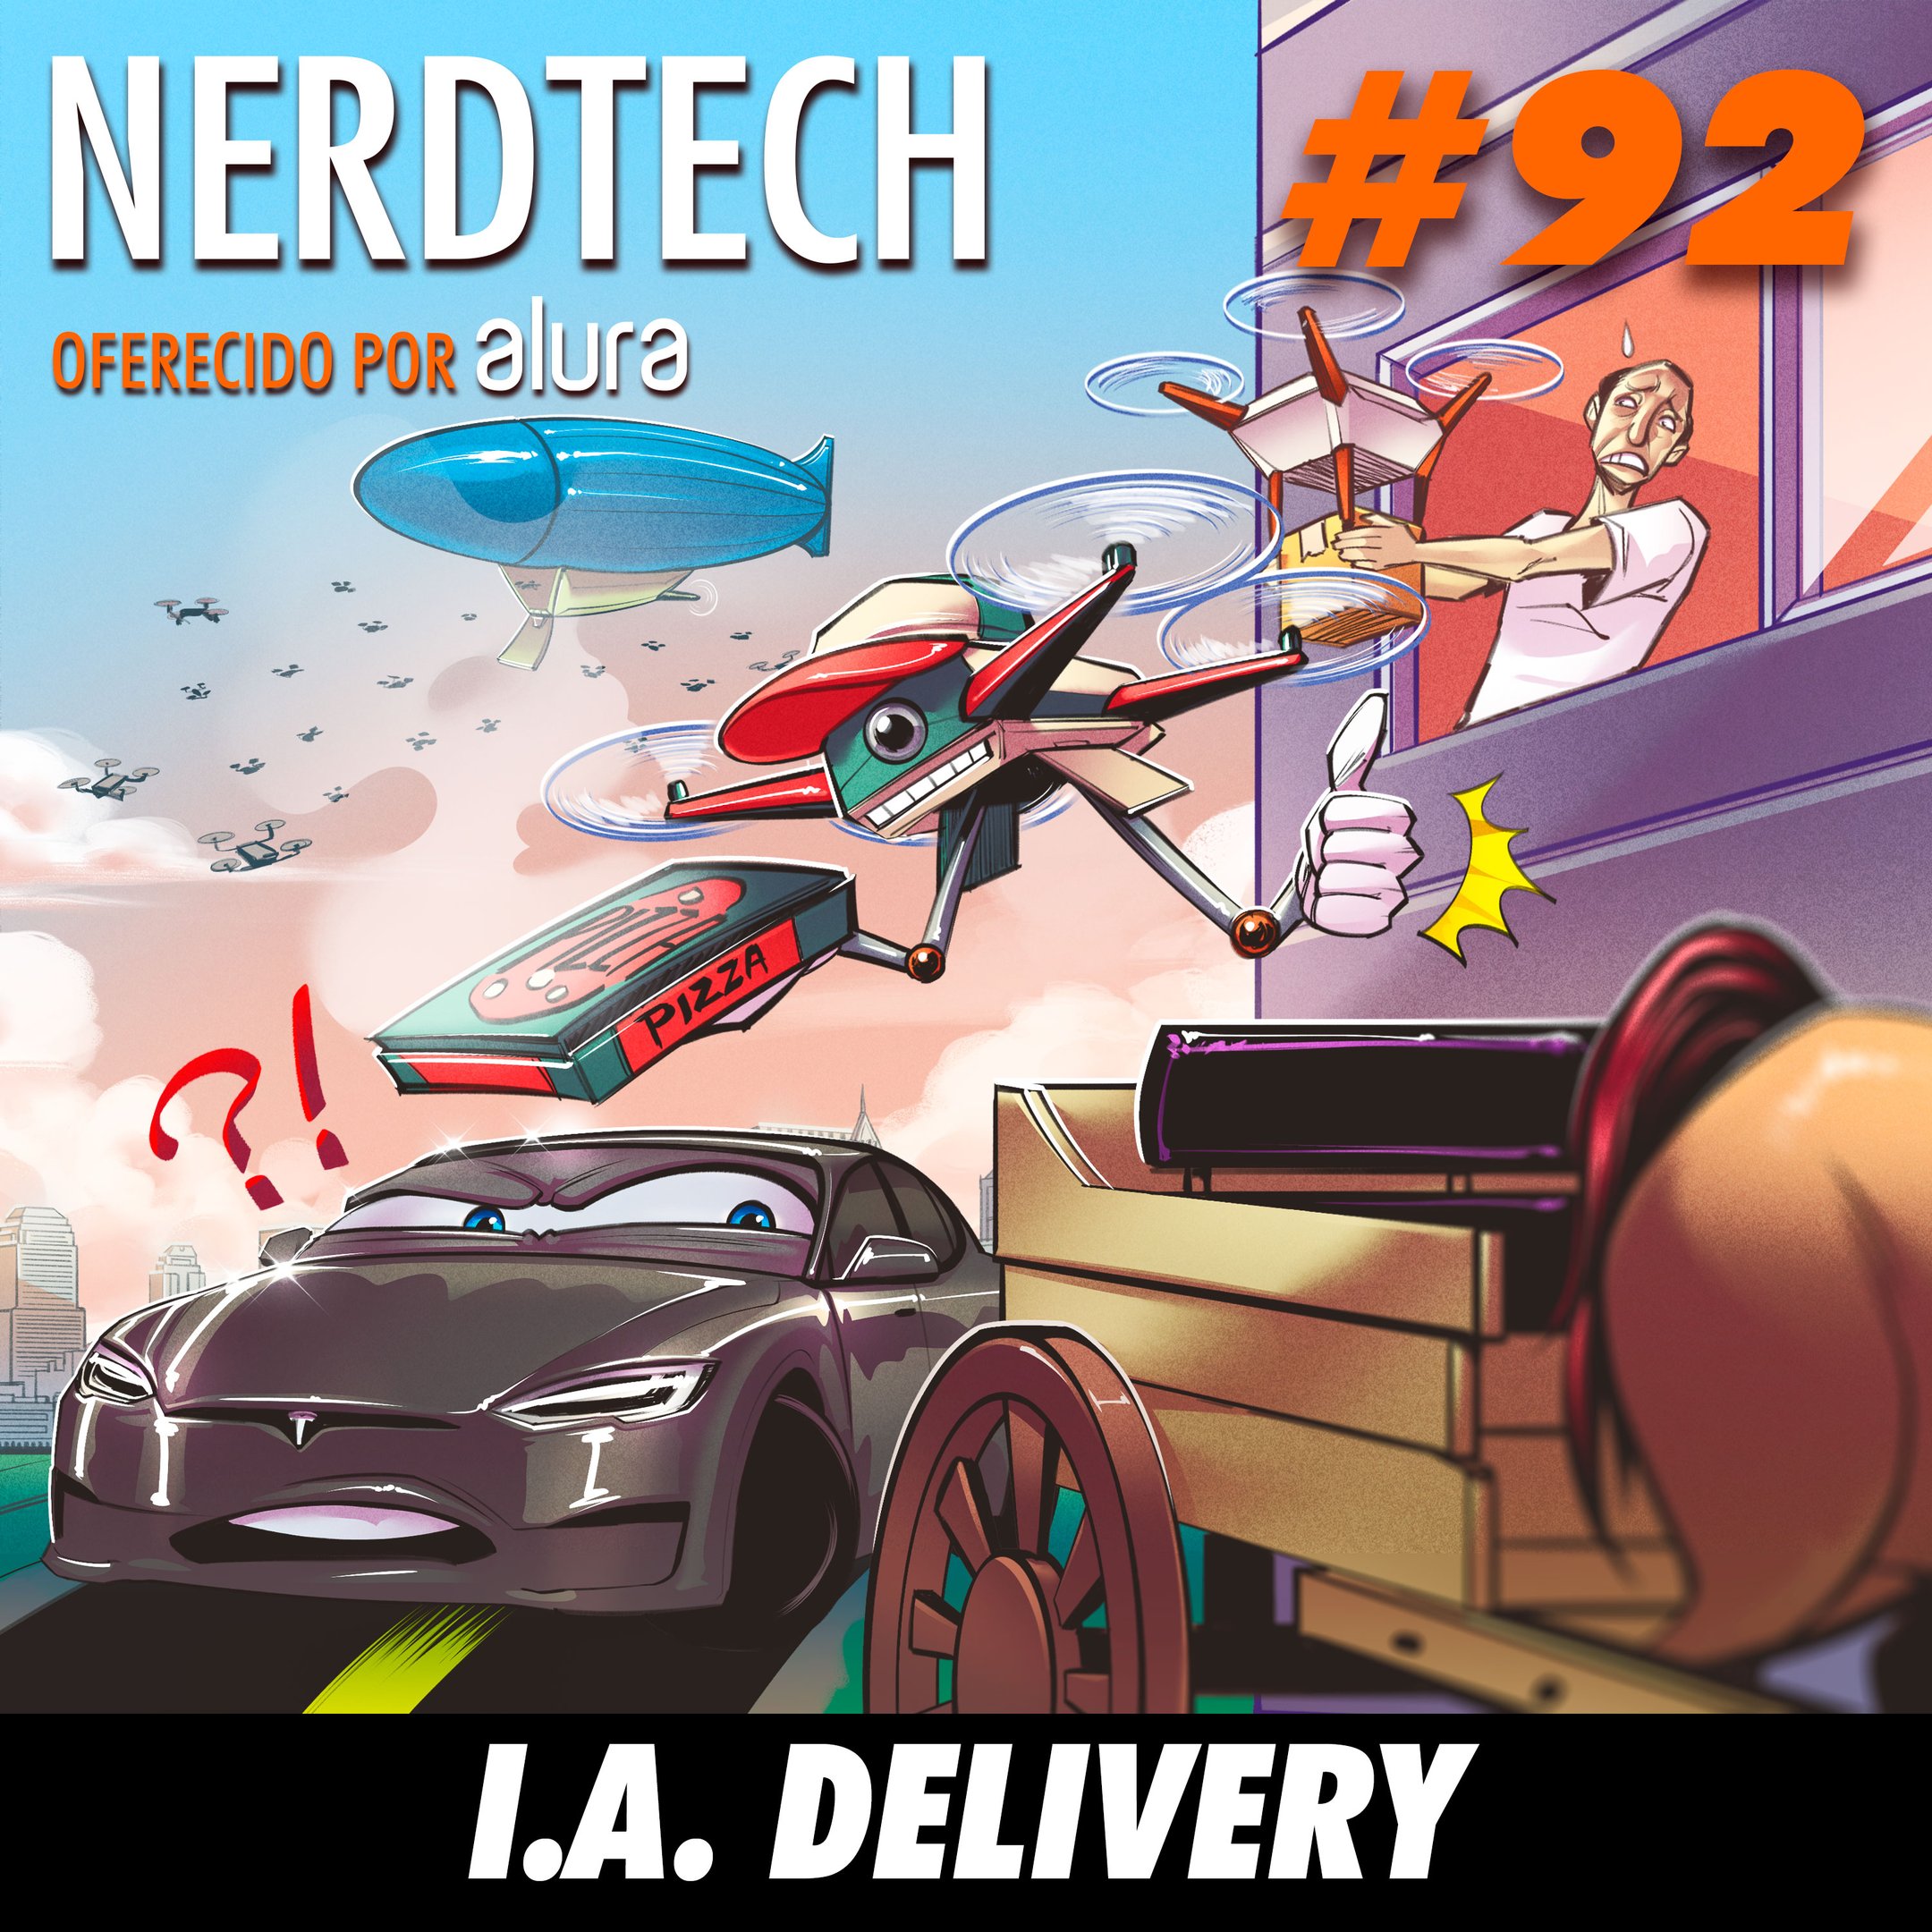 NerdTech 92 - I.A Delivery